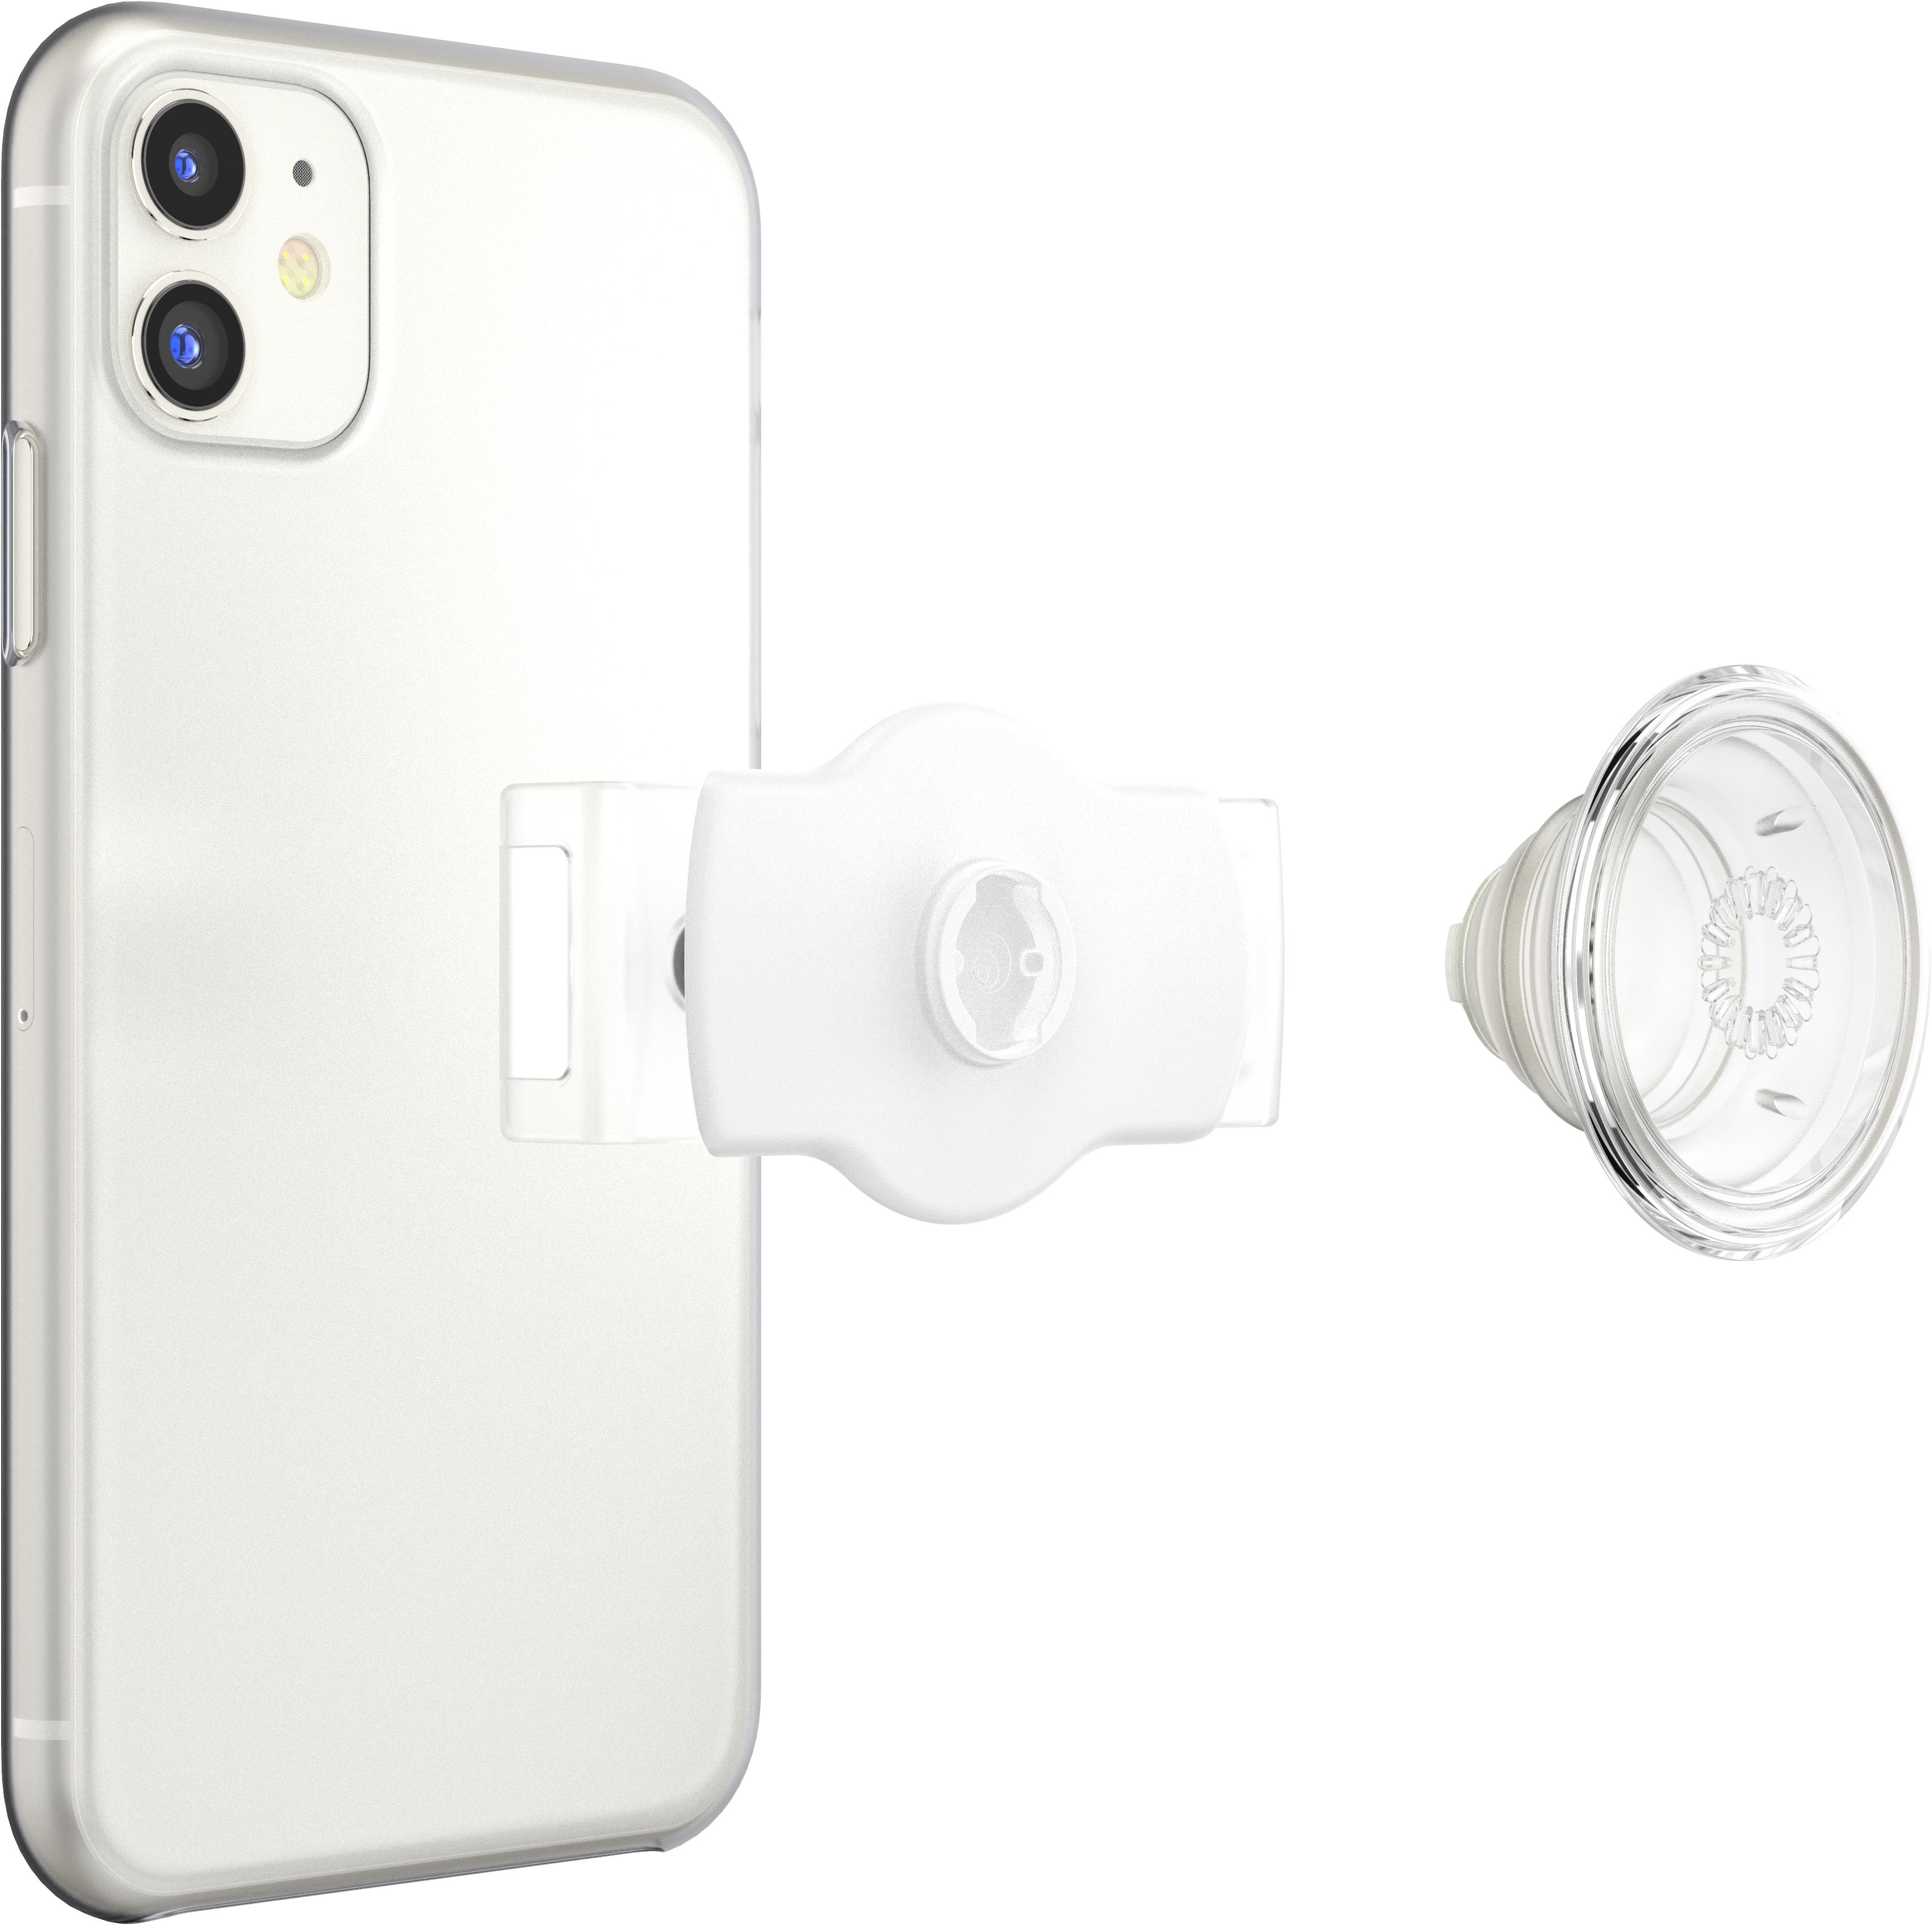 PopSockets: Phone Grip with Expanding Kickstand, Pop Socket for Phone -  White